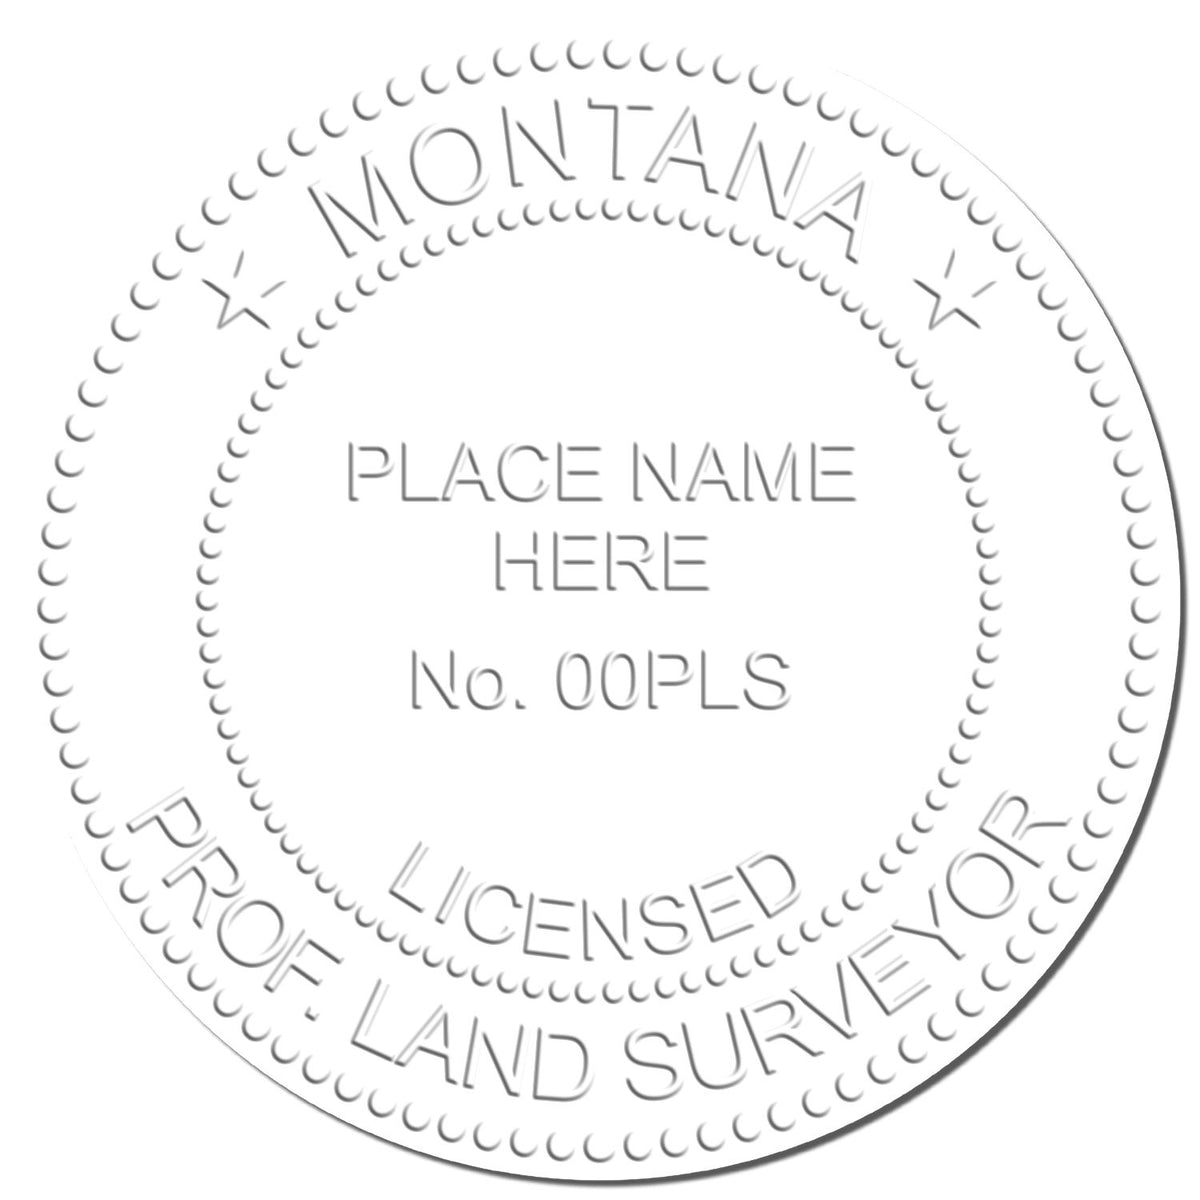 This paper is stamped with a sample imprint of the Heavy Duty Cast Iron Montana Land Surveyor Seal Embosser, signifying its quality and reliability.